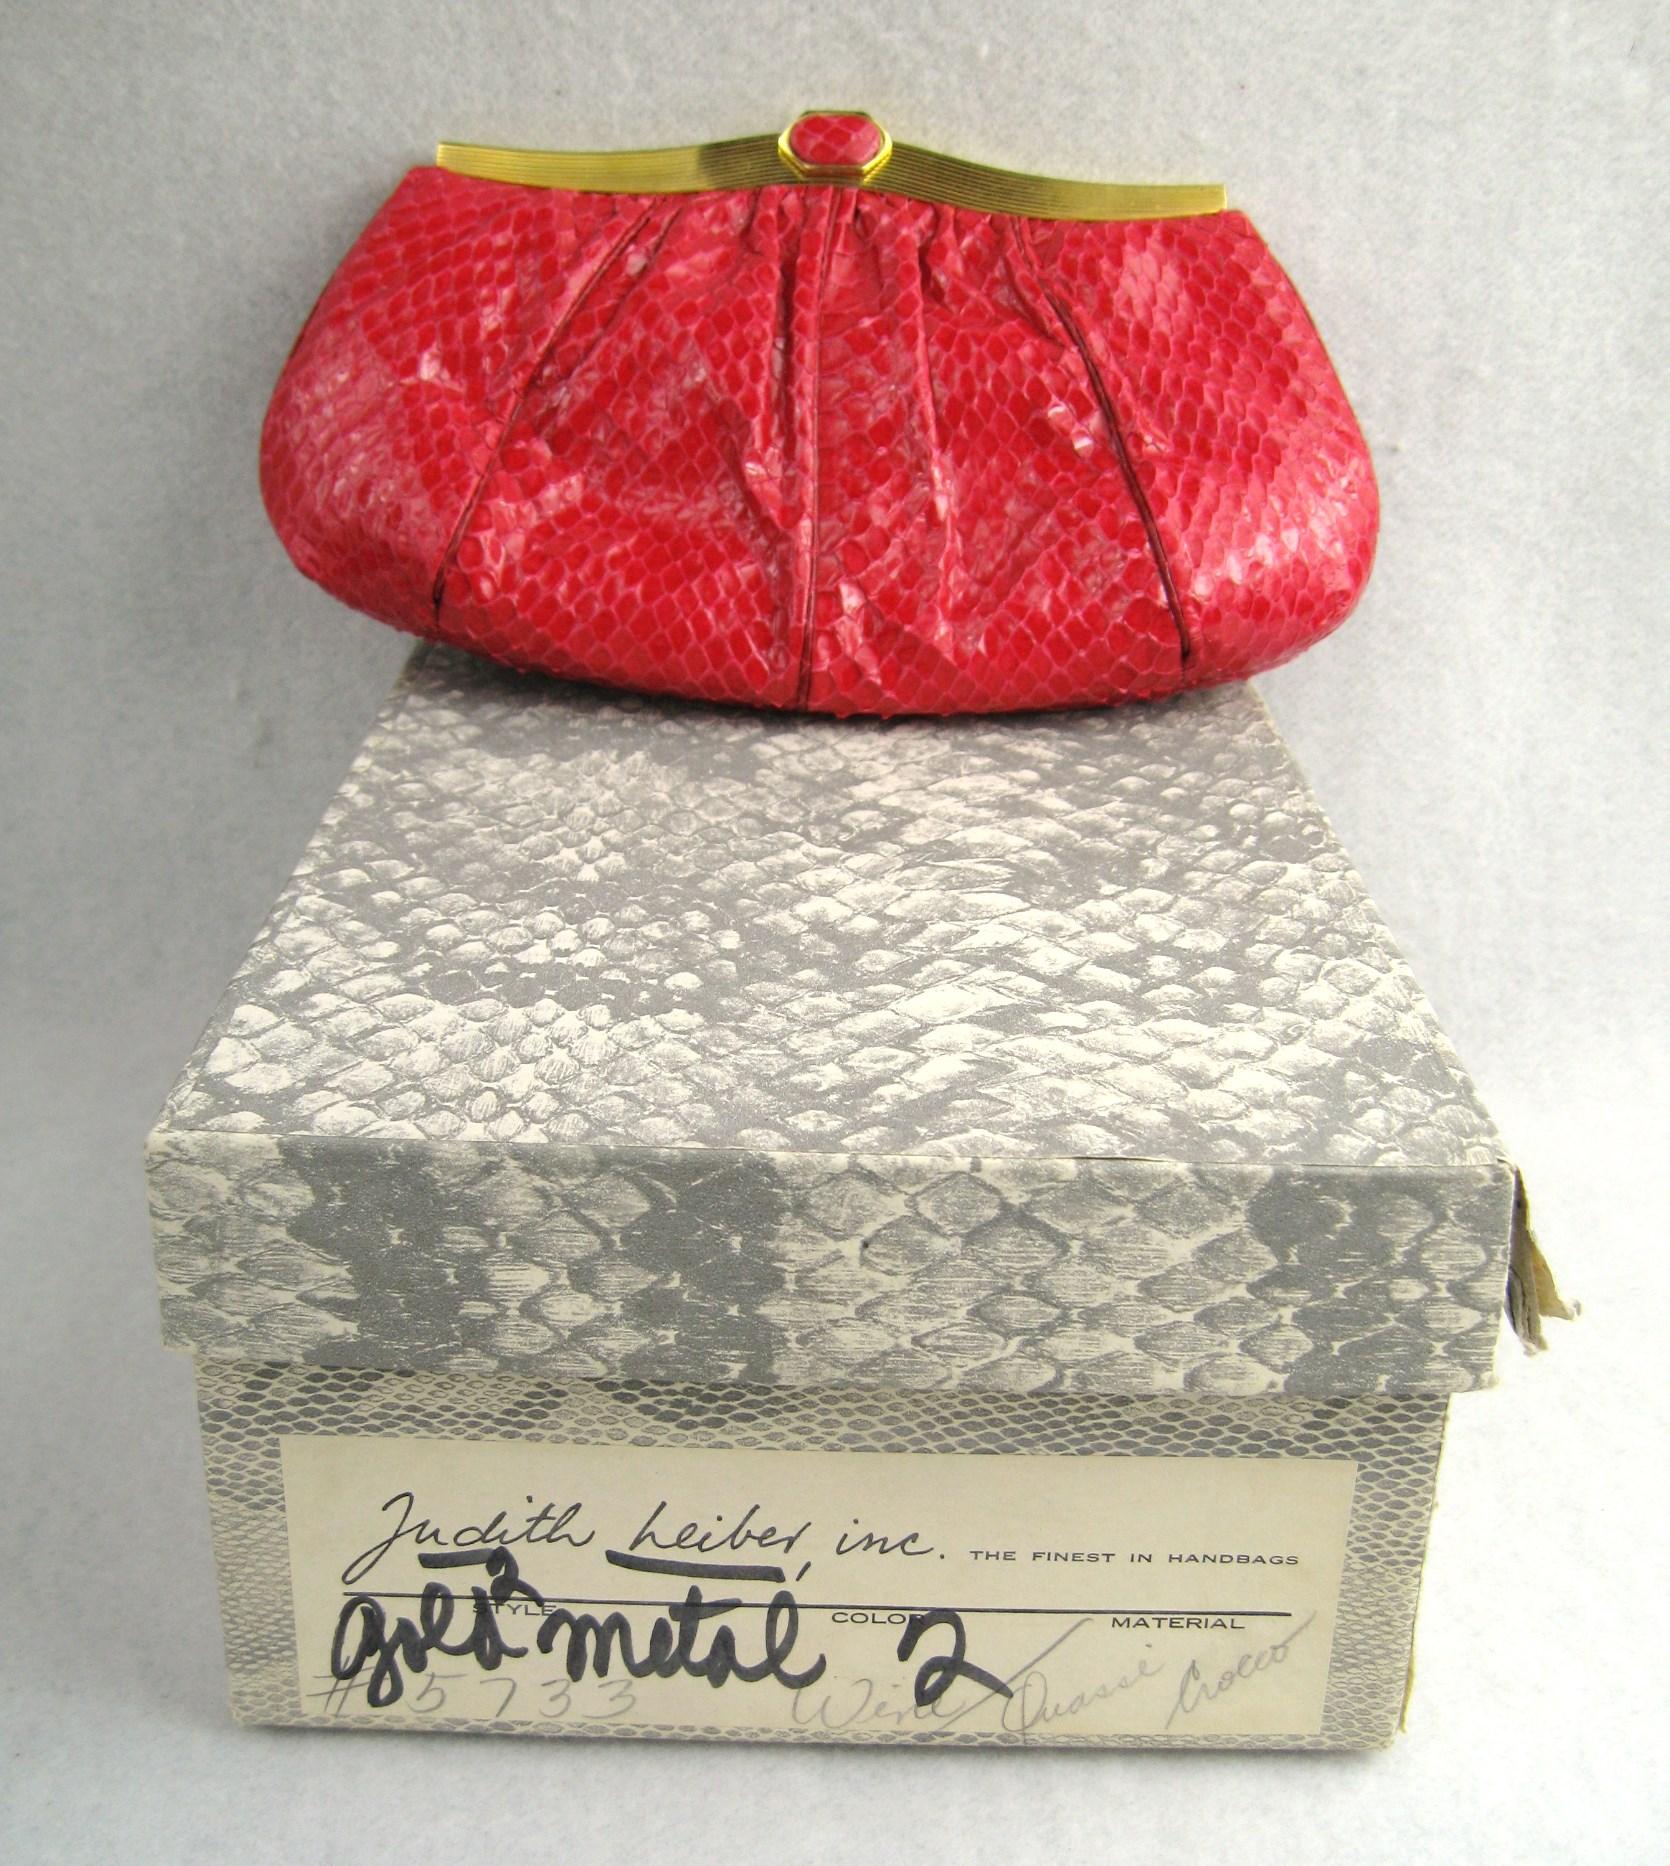 Lovely petite red 1980's snakeskin clutch shoulder bag by JUDITH LEIBER! Wonderful supple skins with shiny gold-tone frame and snakeskin flip-top clasp. Shoulder chain strap folds into the bag for clutch carrying. The interior is lovely and has  1